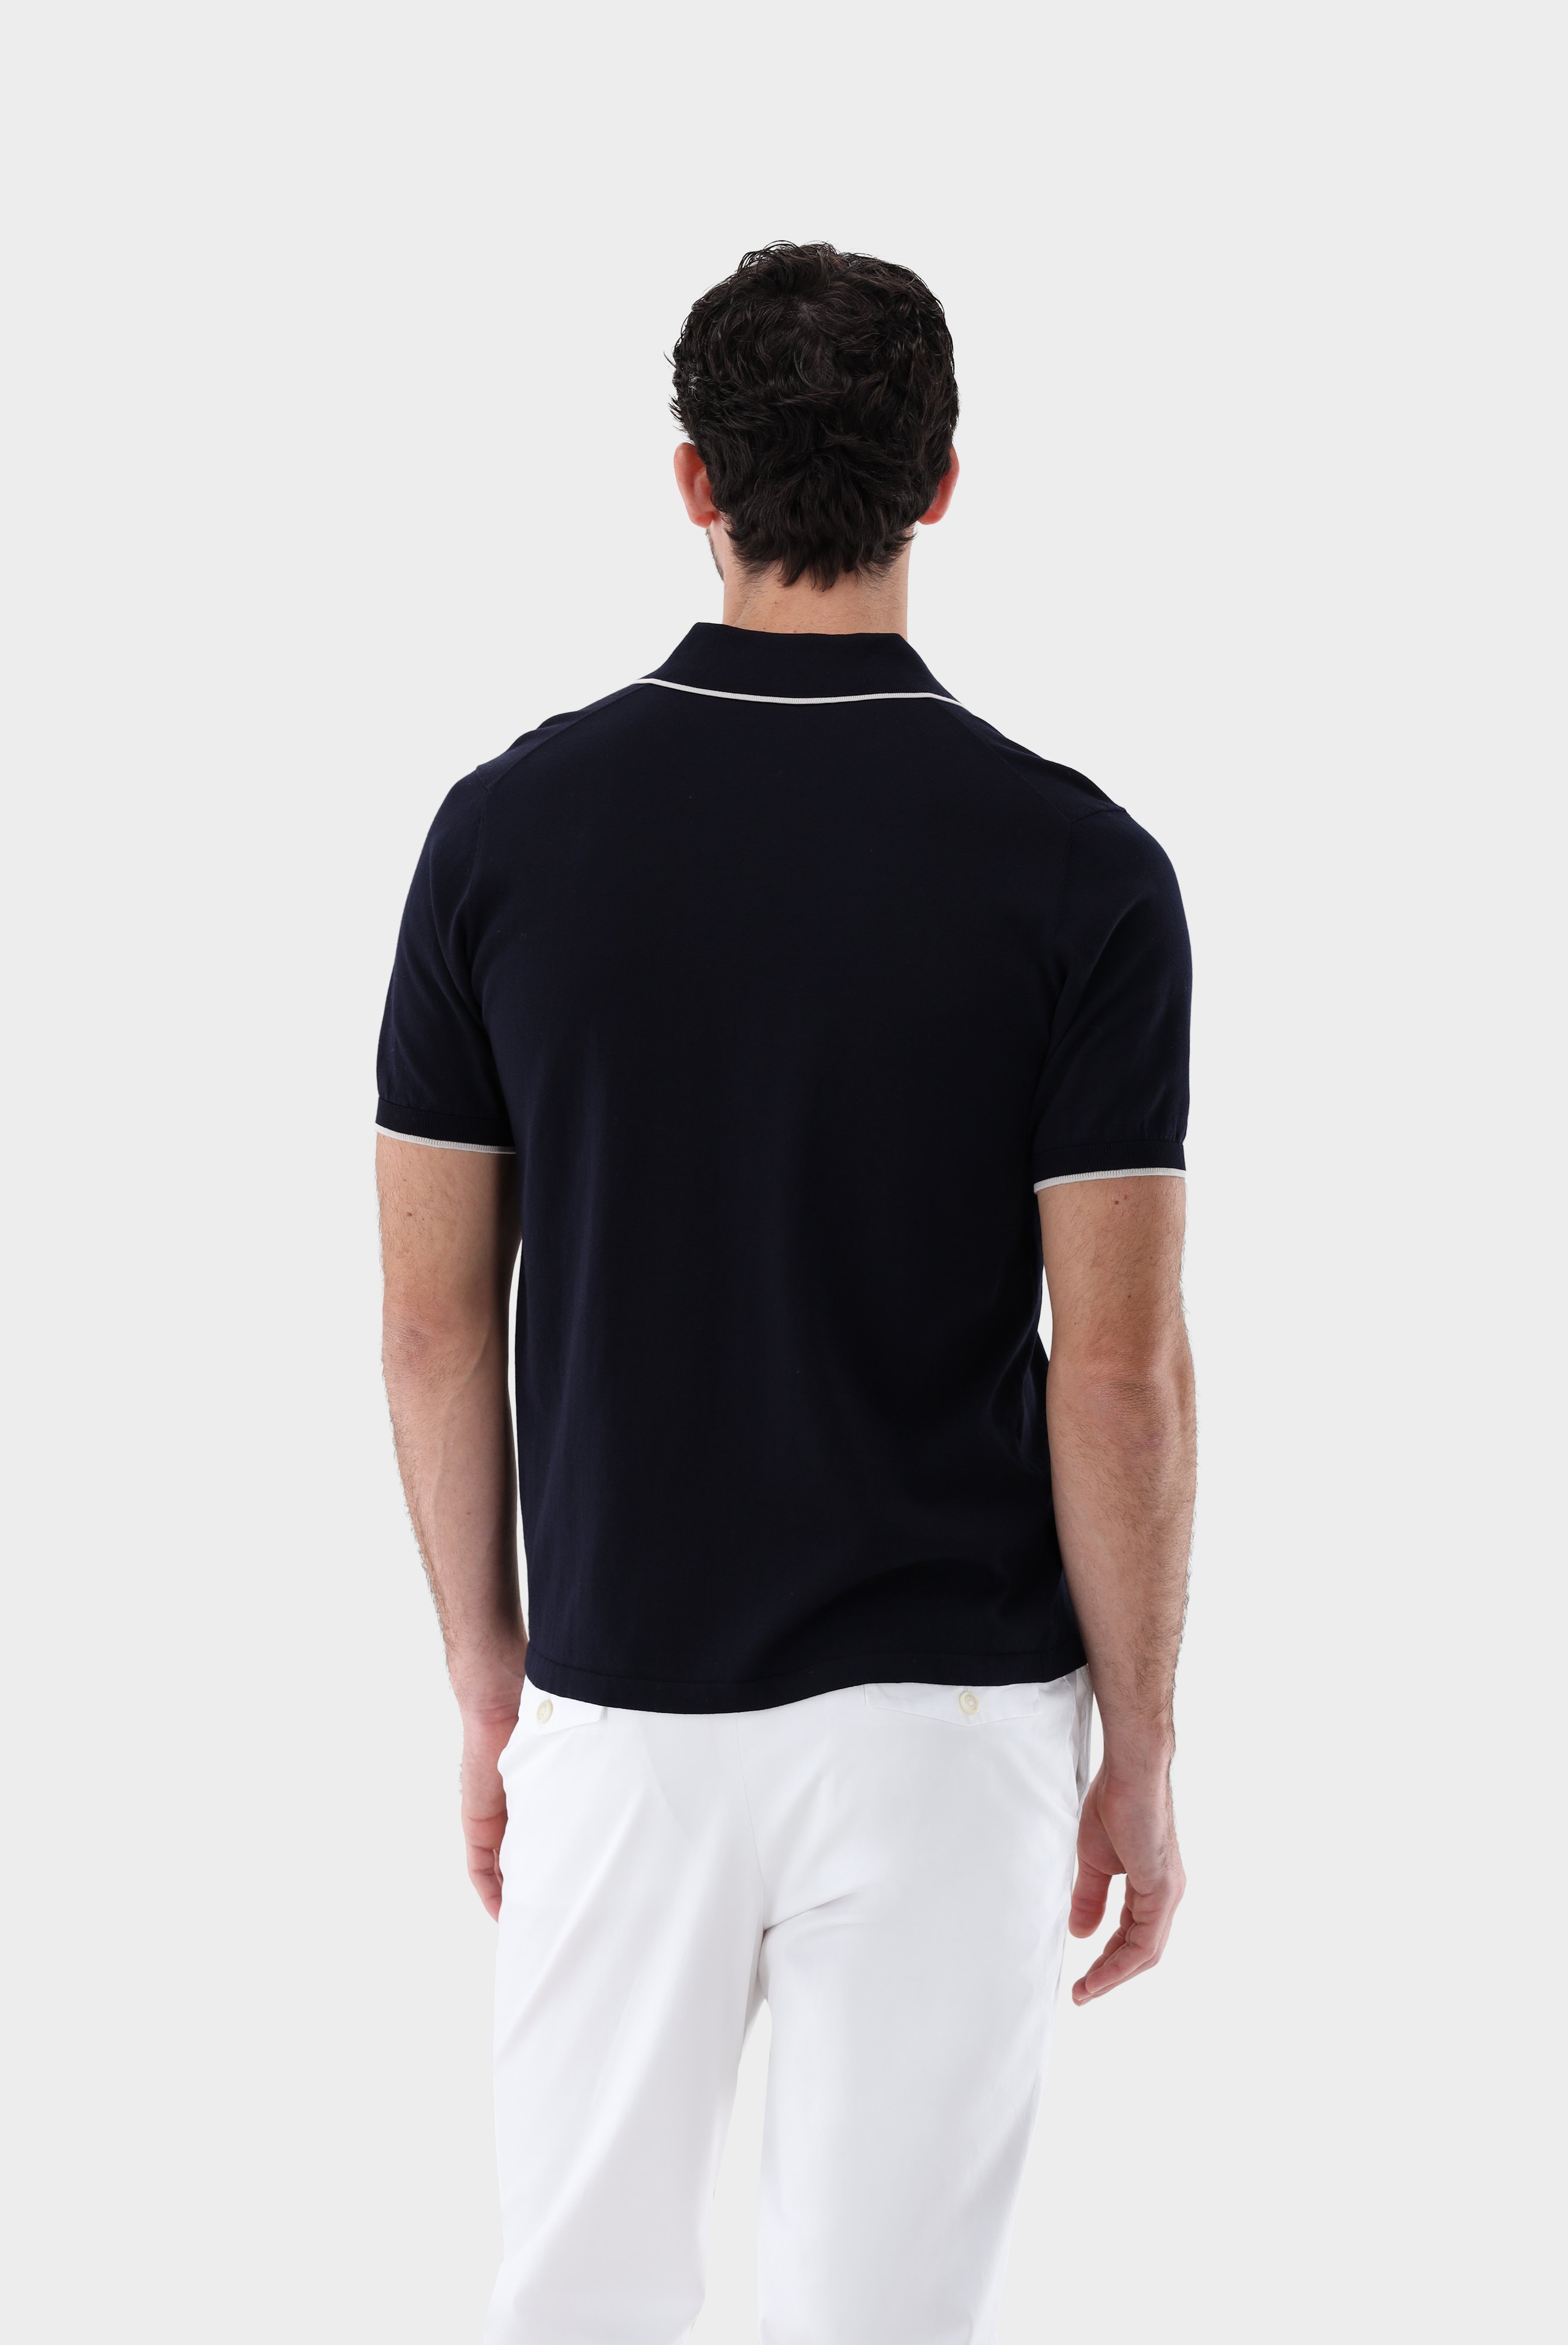 Poloshirts+Zip Knit-Polo in Air Cotton+82.8647.S7.S00174.795.M